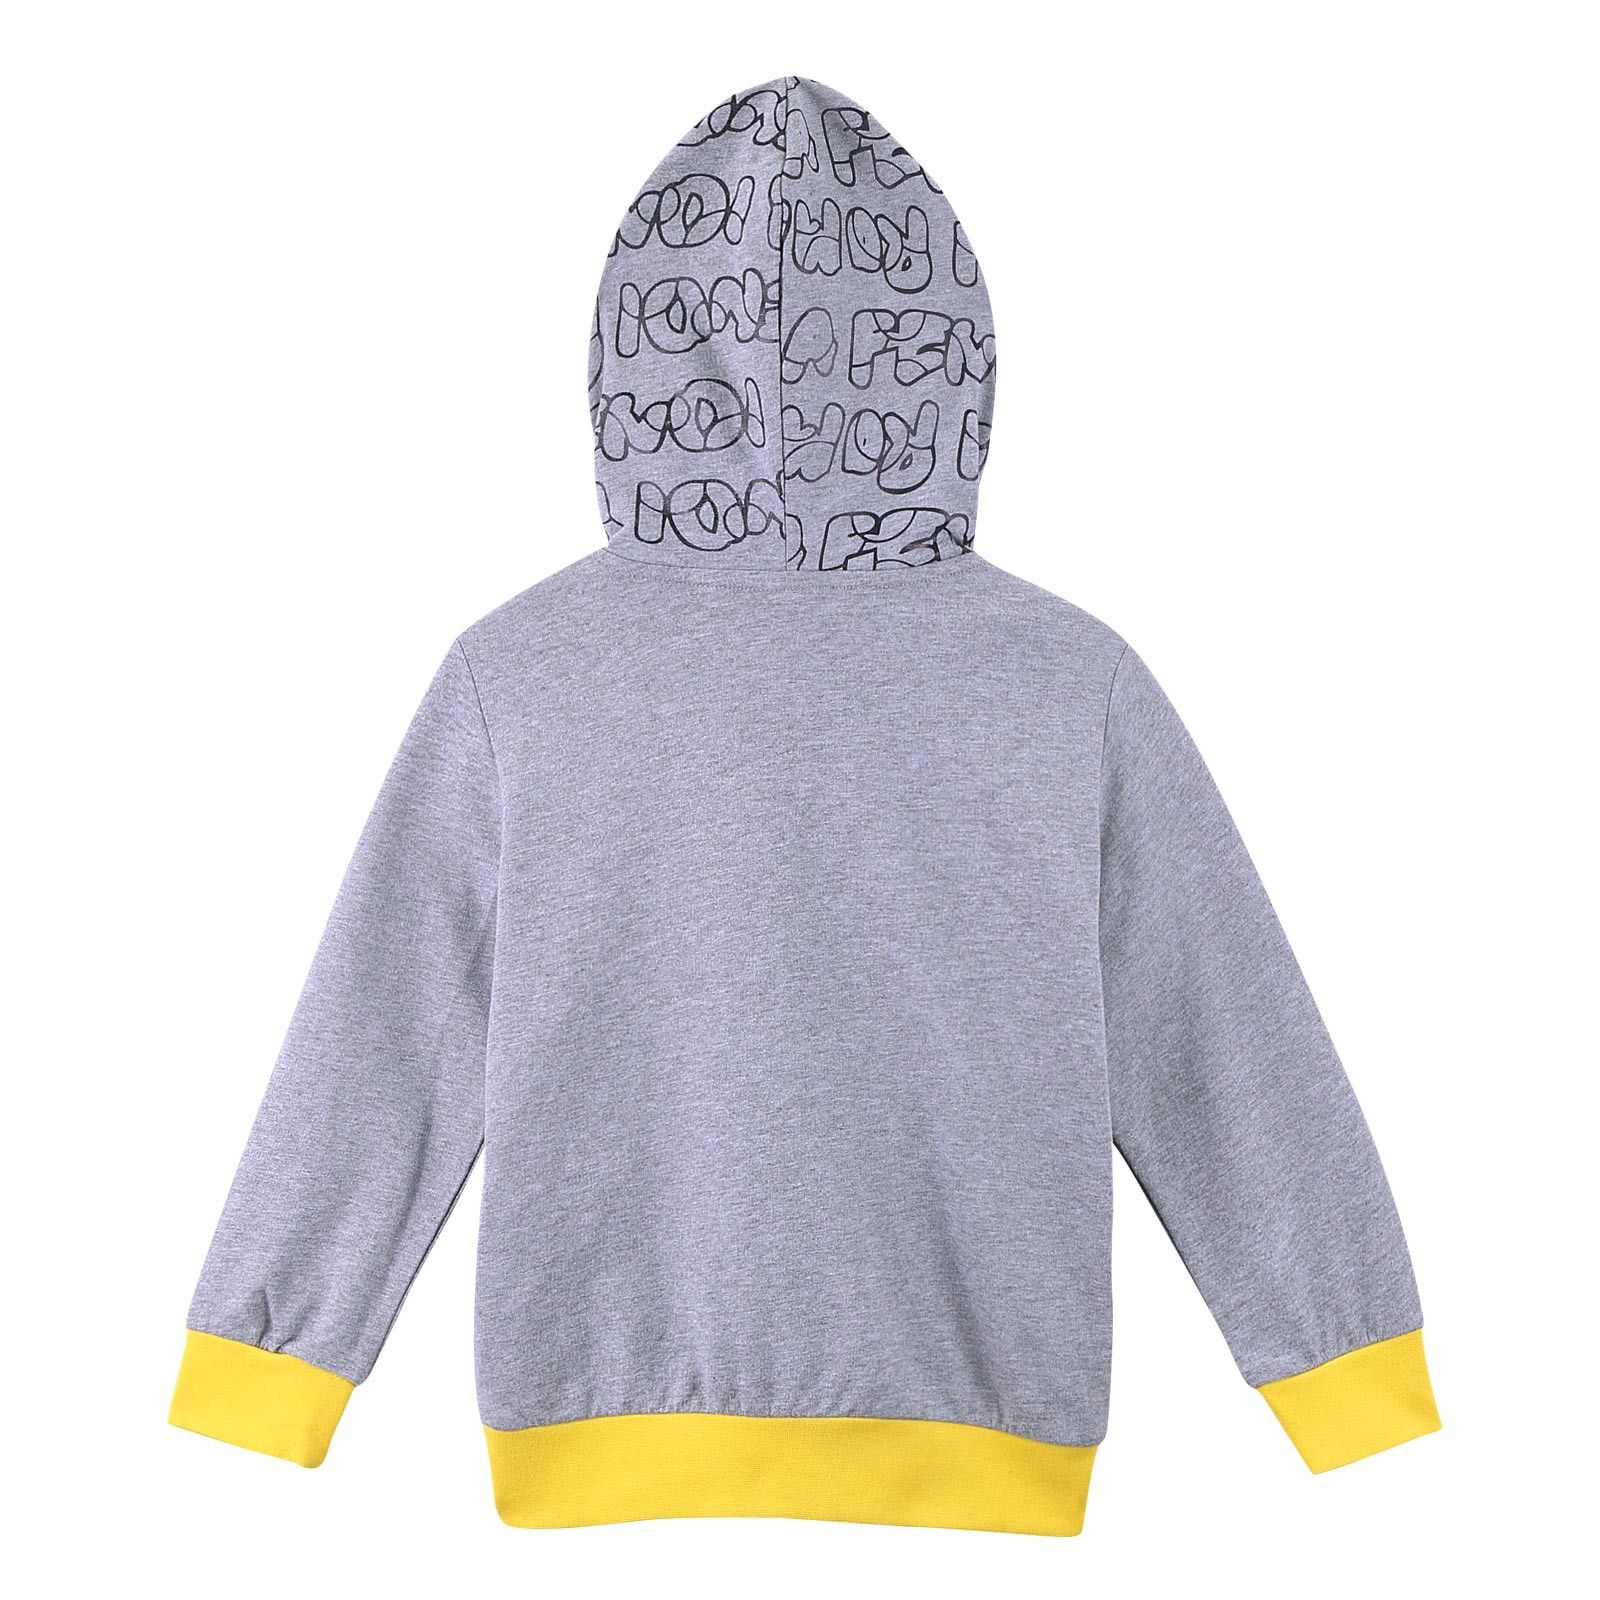 Boys Grey Cotton Printed Trims Zip-up Tops With Yellow Cuffs - CÉMAROSE | Children's Fashion Store - 3